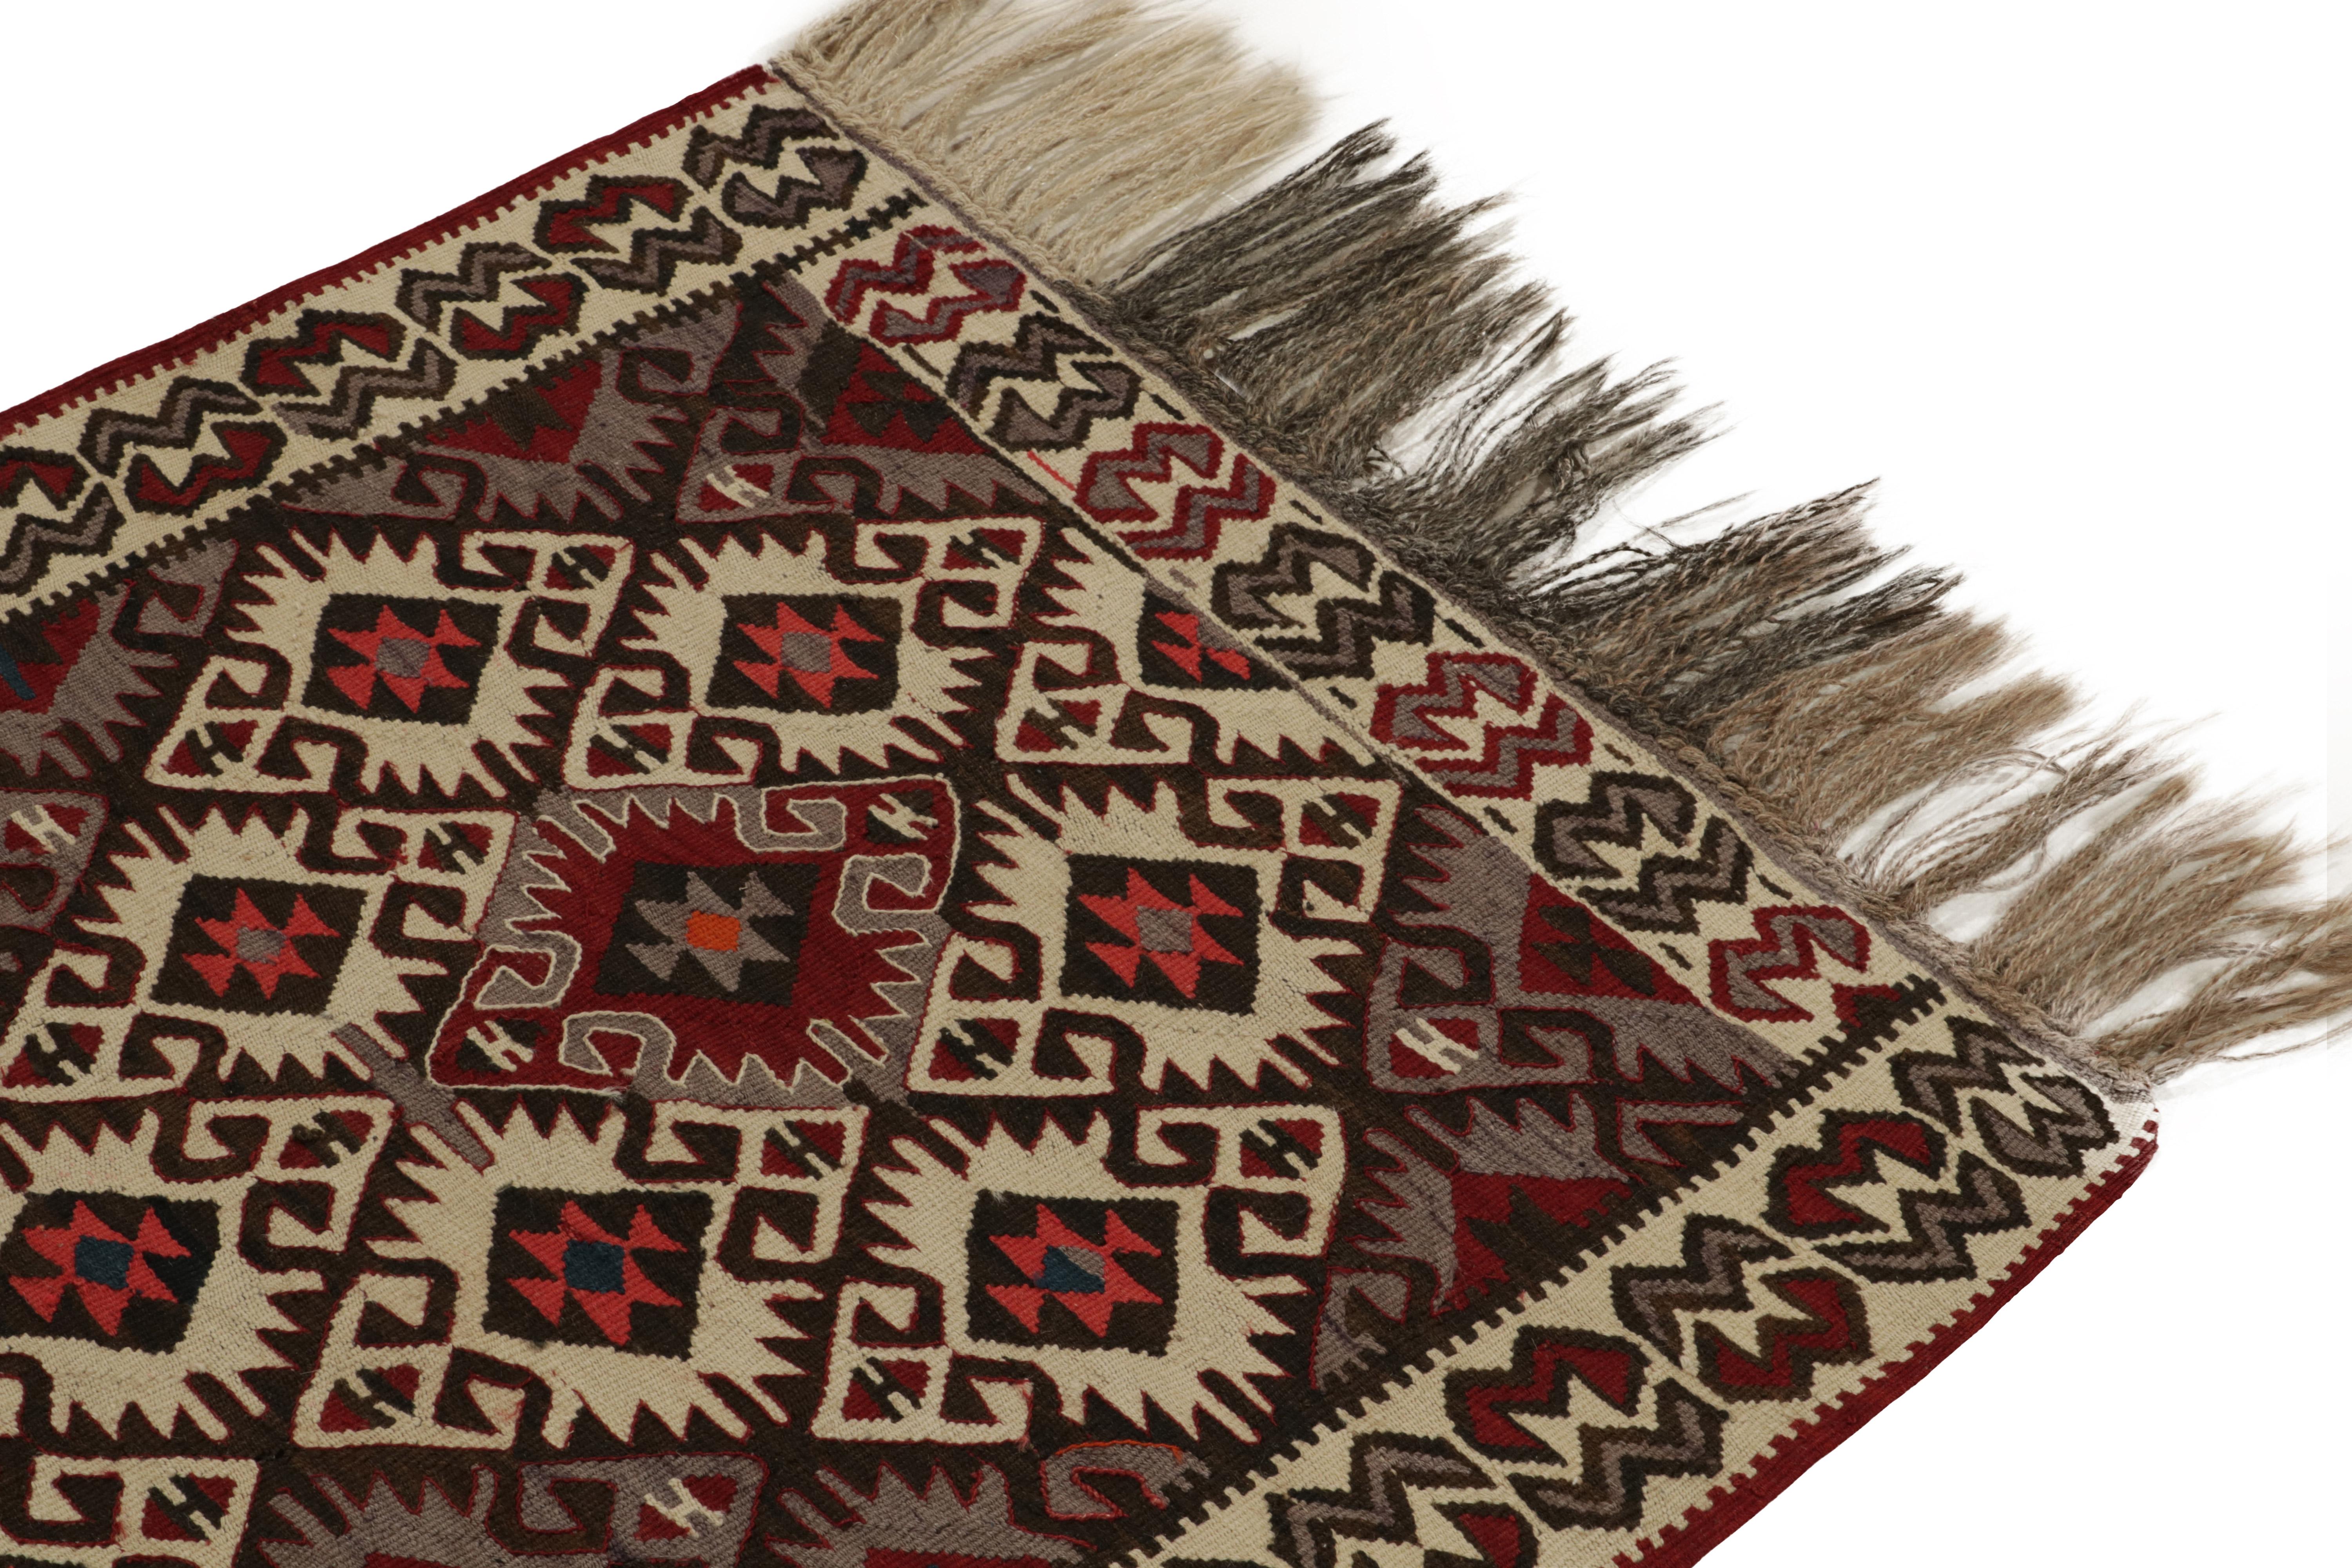 Early 20th Century Antique Turkish Kilim Rug in Beige-Brown, Gray Tribal Pattern by Rug & Kilim For Sale